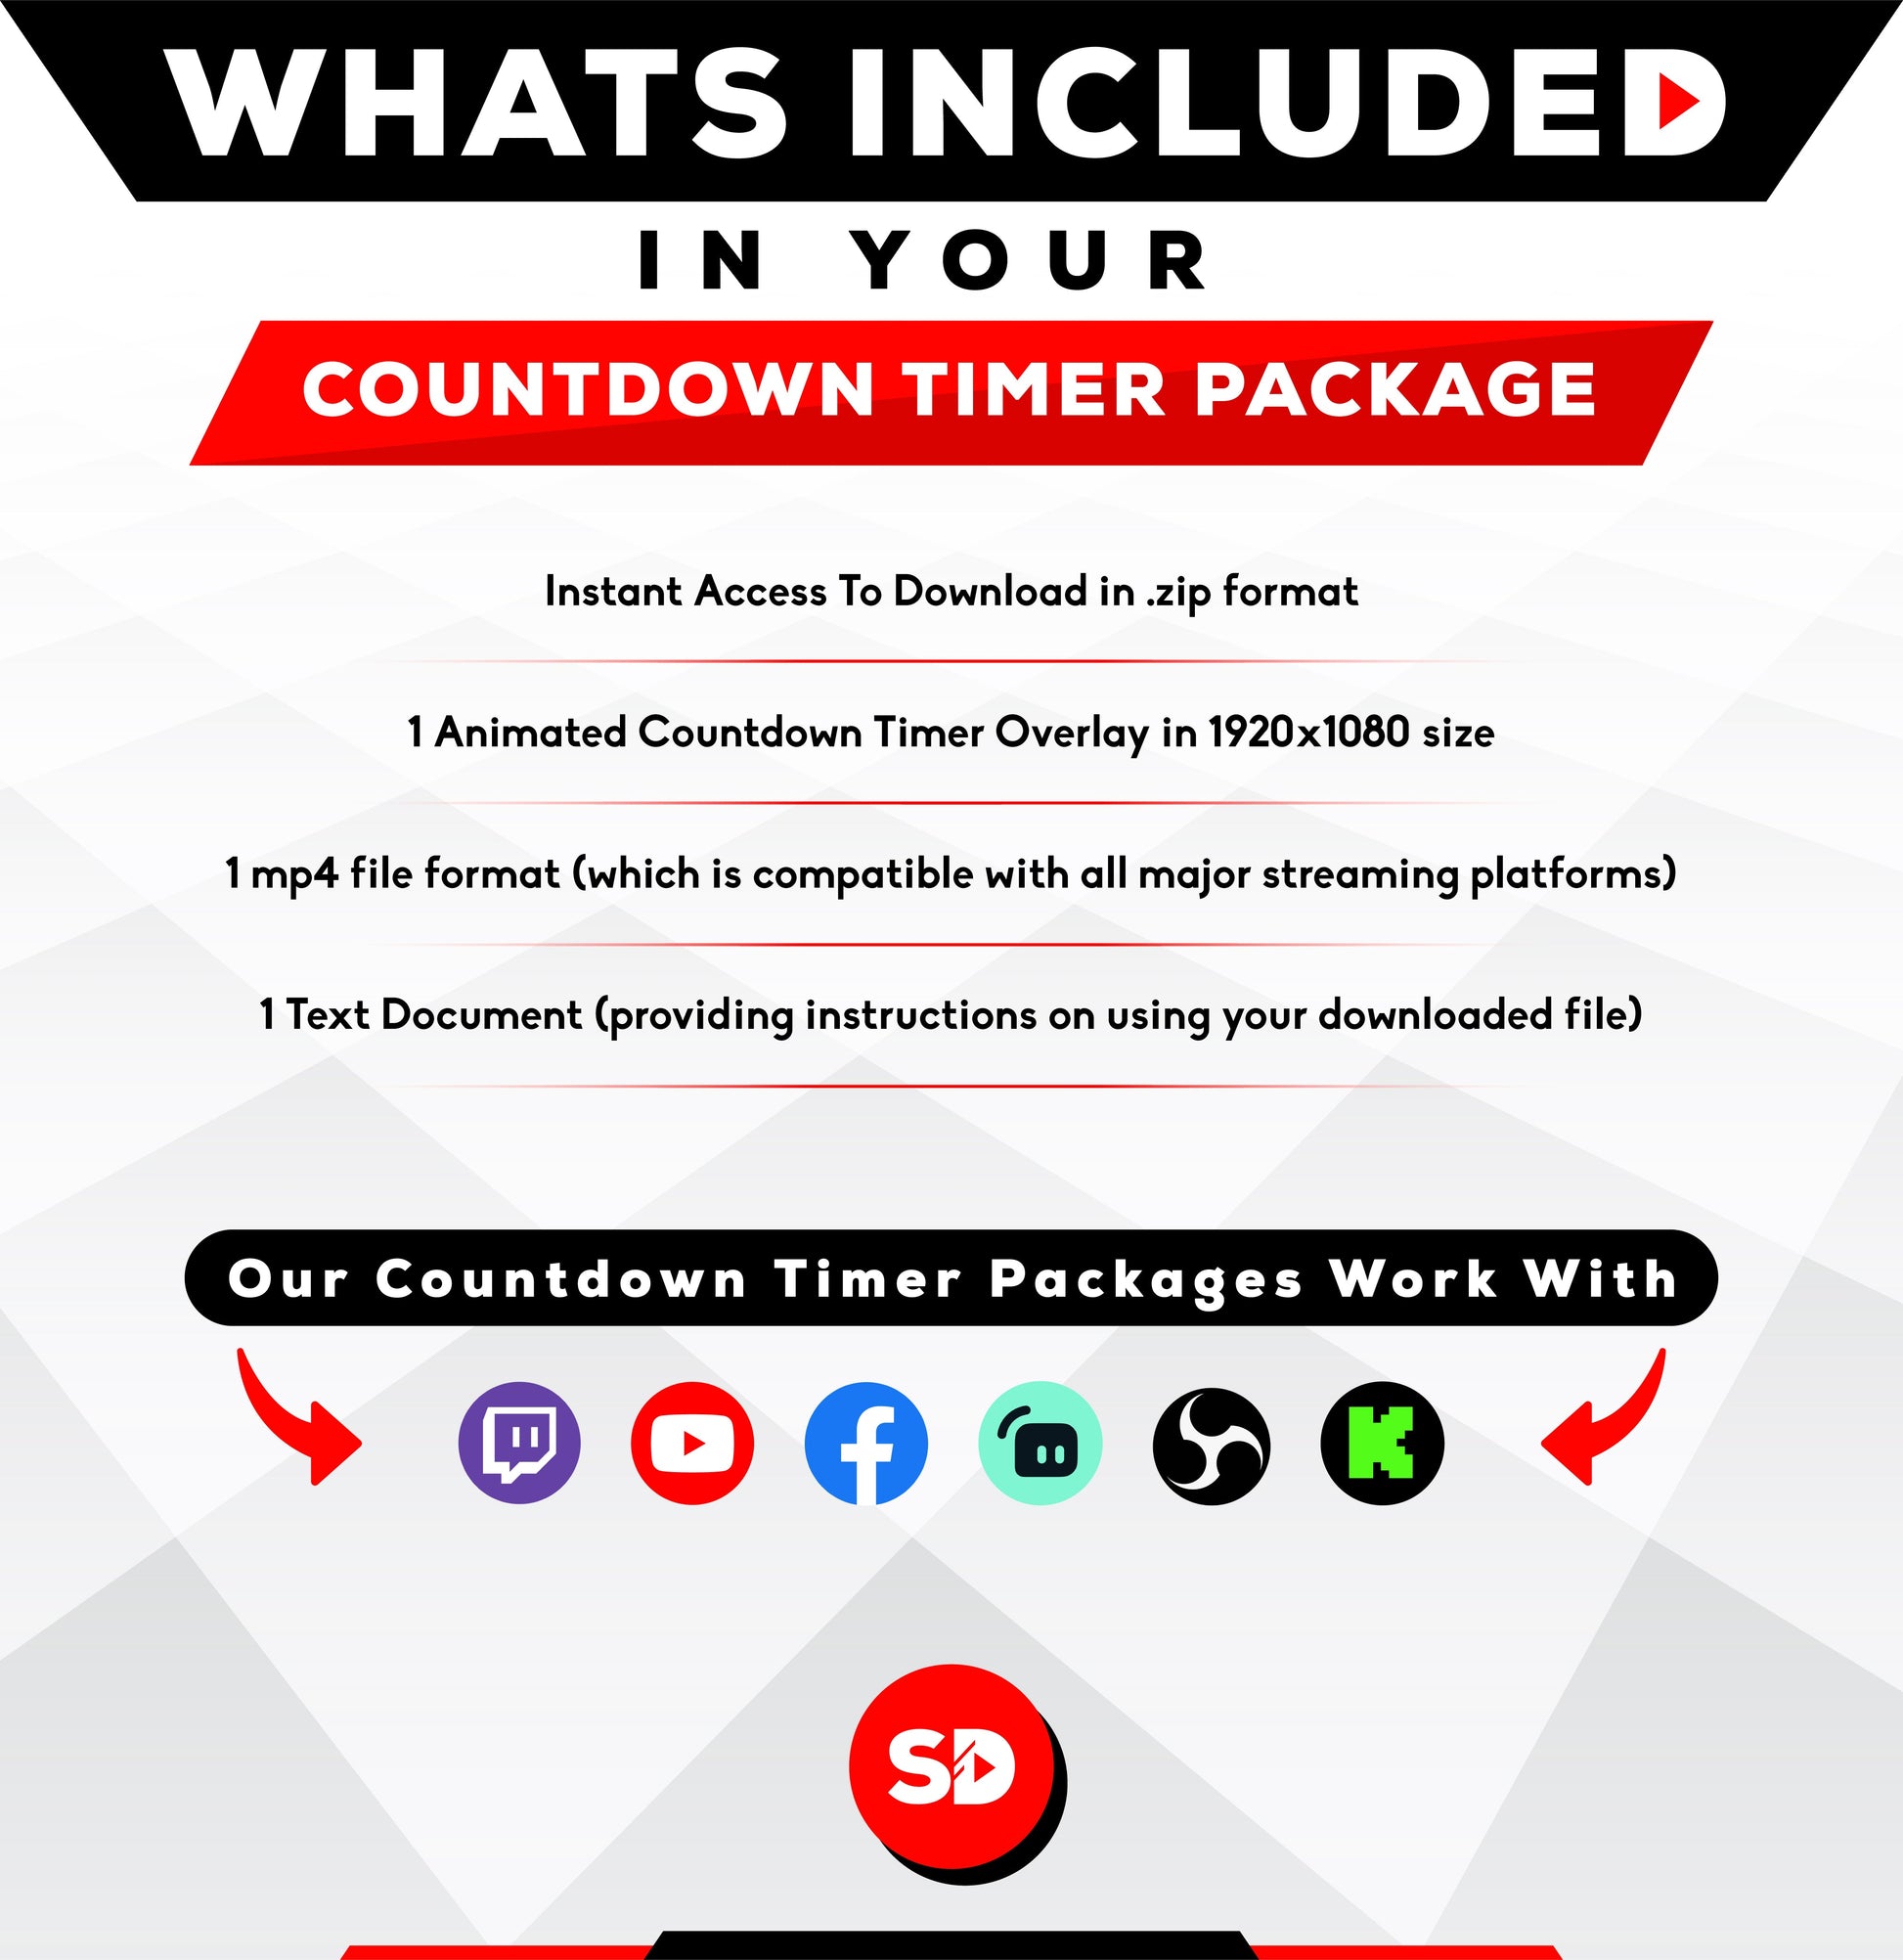 whats included in your package - countdown timer - buckets - stream designz